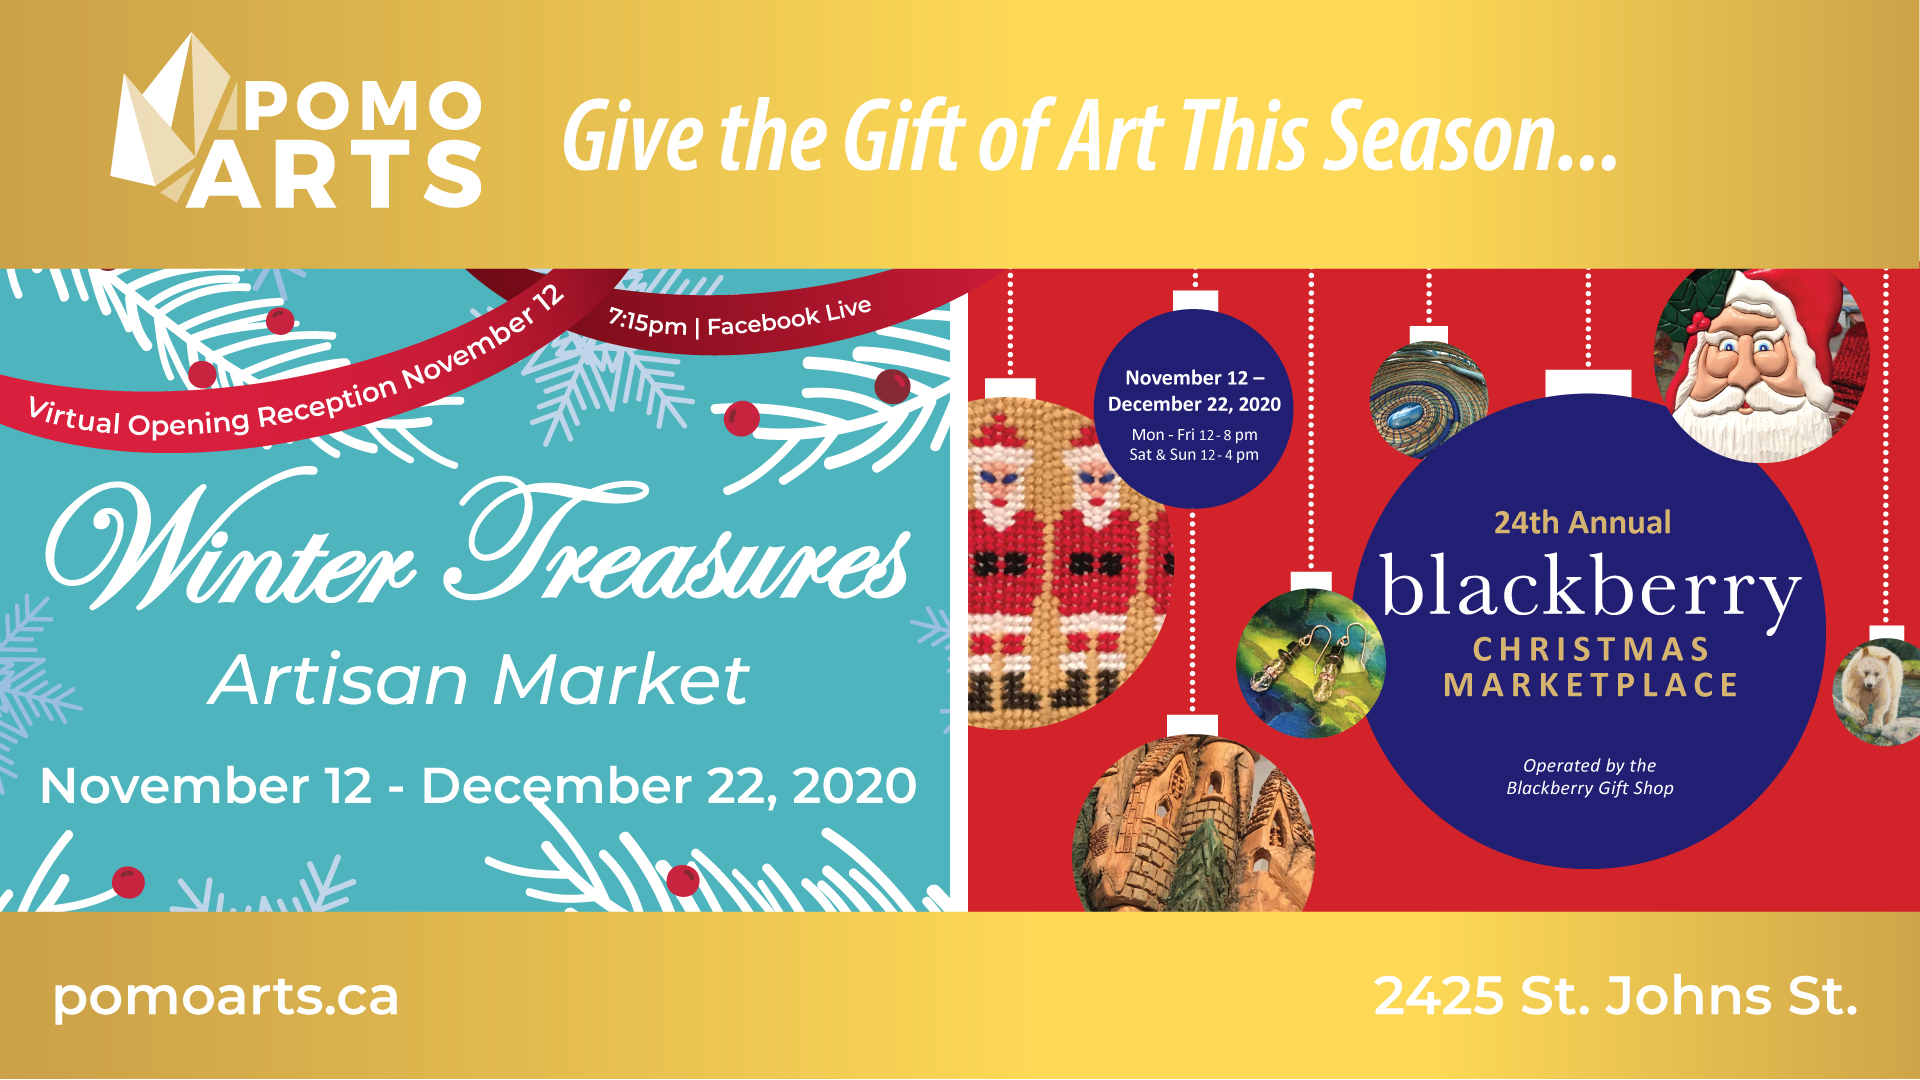 Port Moody arts hub to launch curated sale in time for Christmas shopping